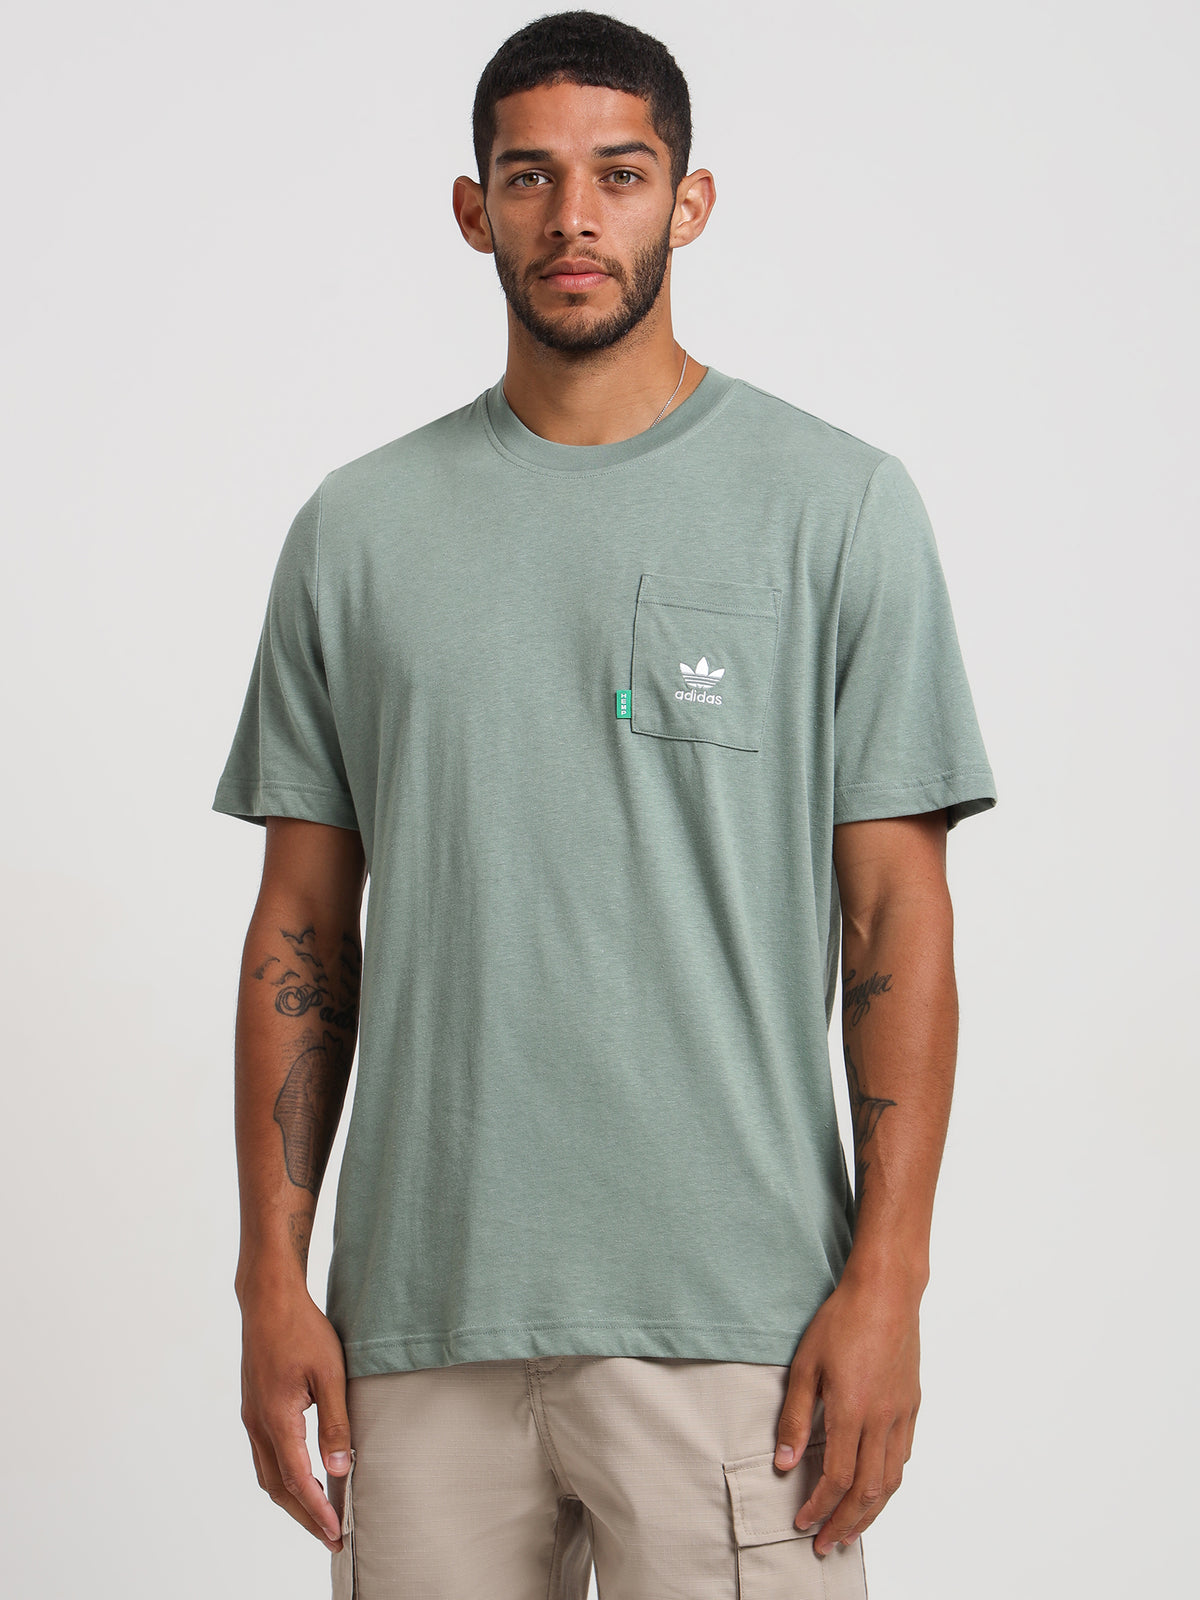 Essentials+ Made With Hemp T-Shirt in Silver Green